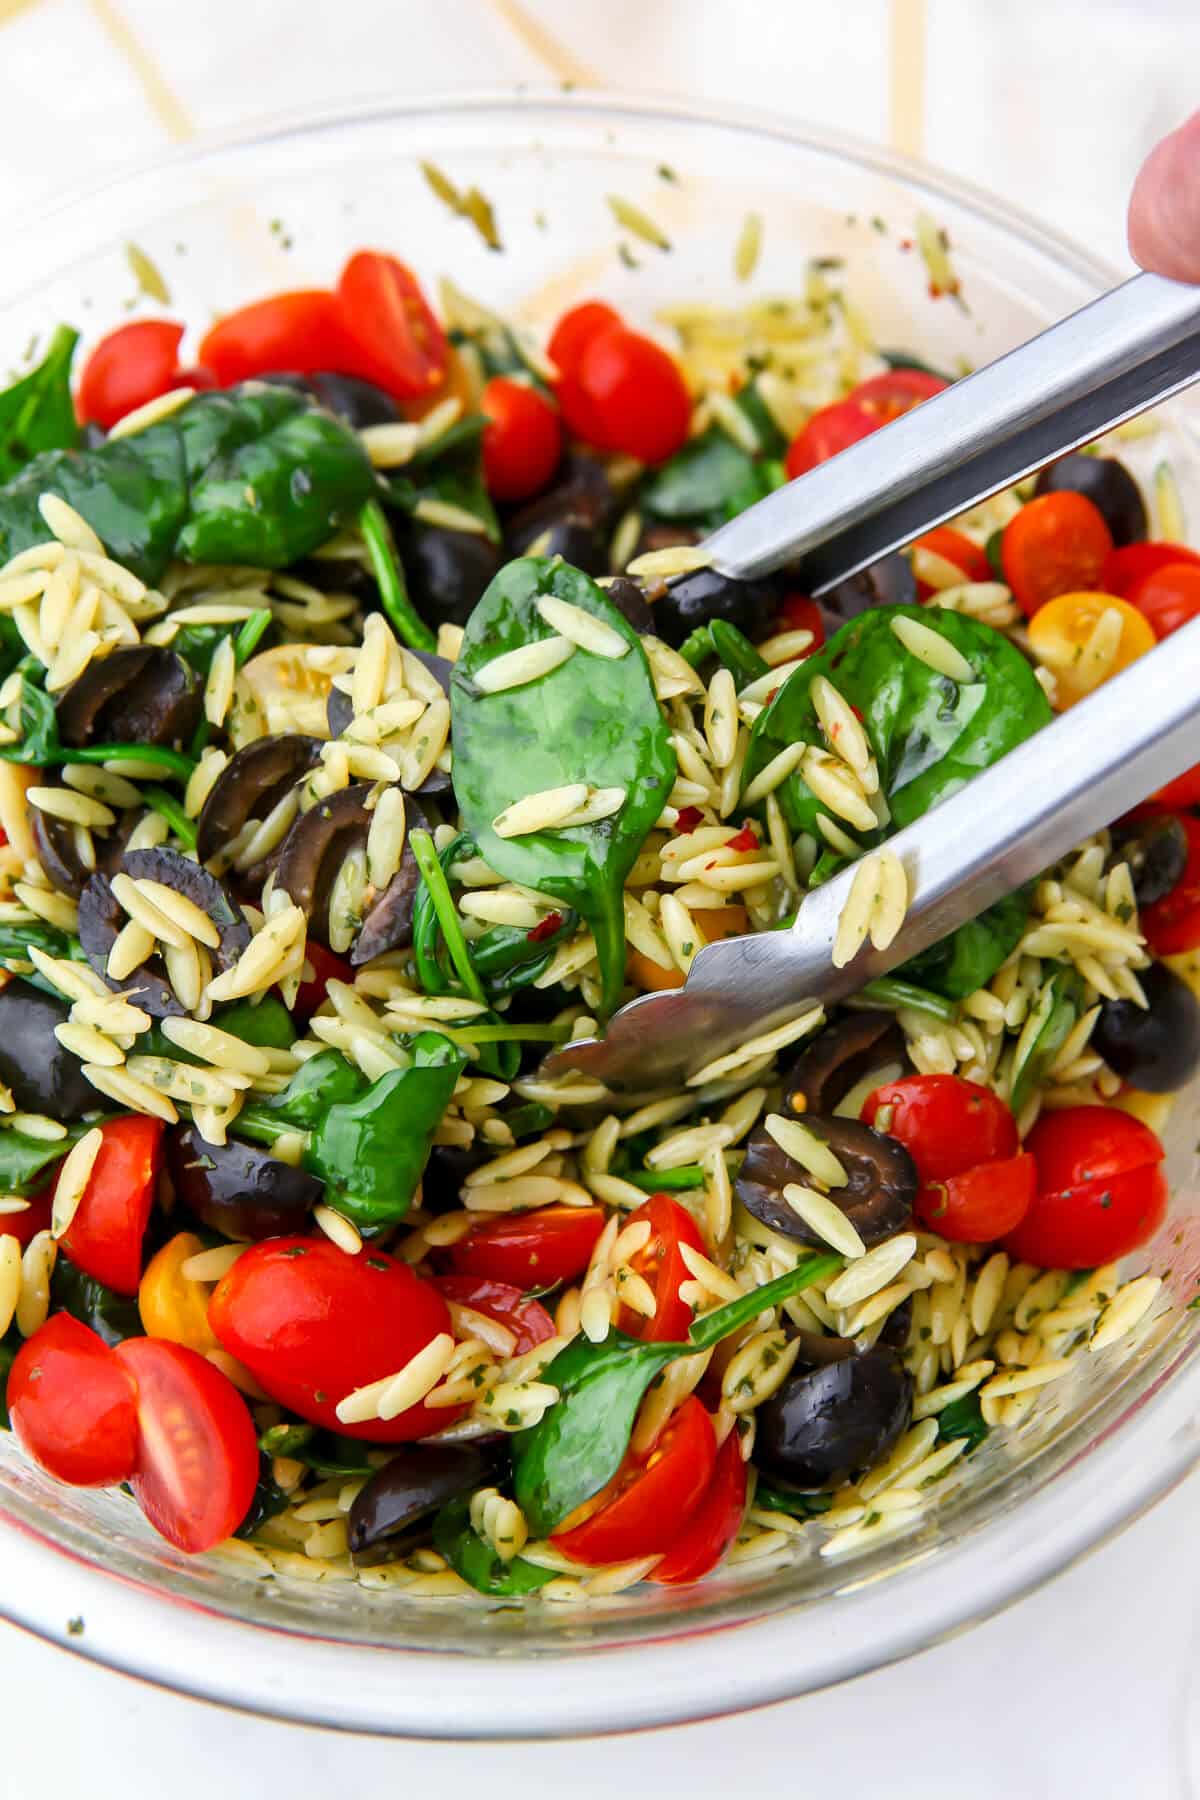 Orzo pasta mixed with vegan pesto, baby spinach, cherry tomatoes, and black olives.